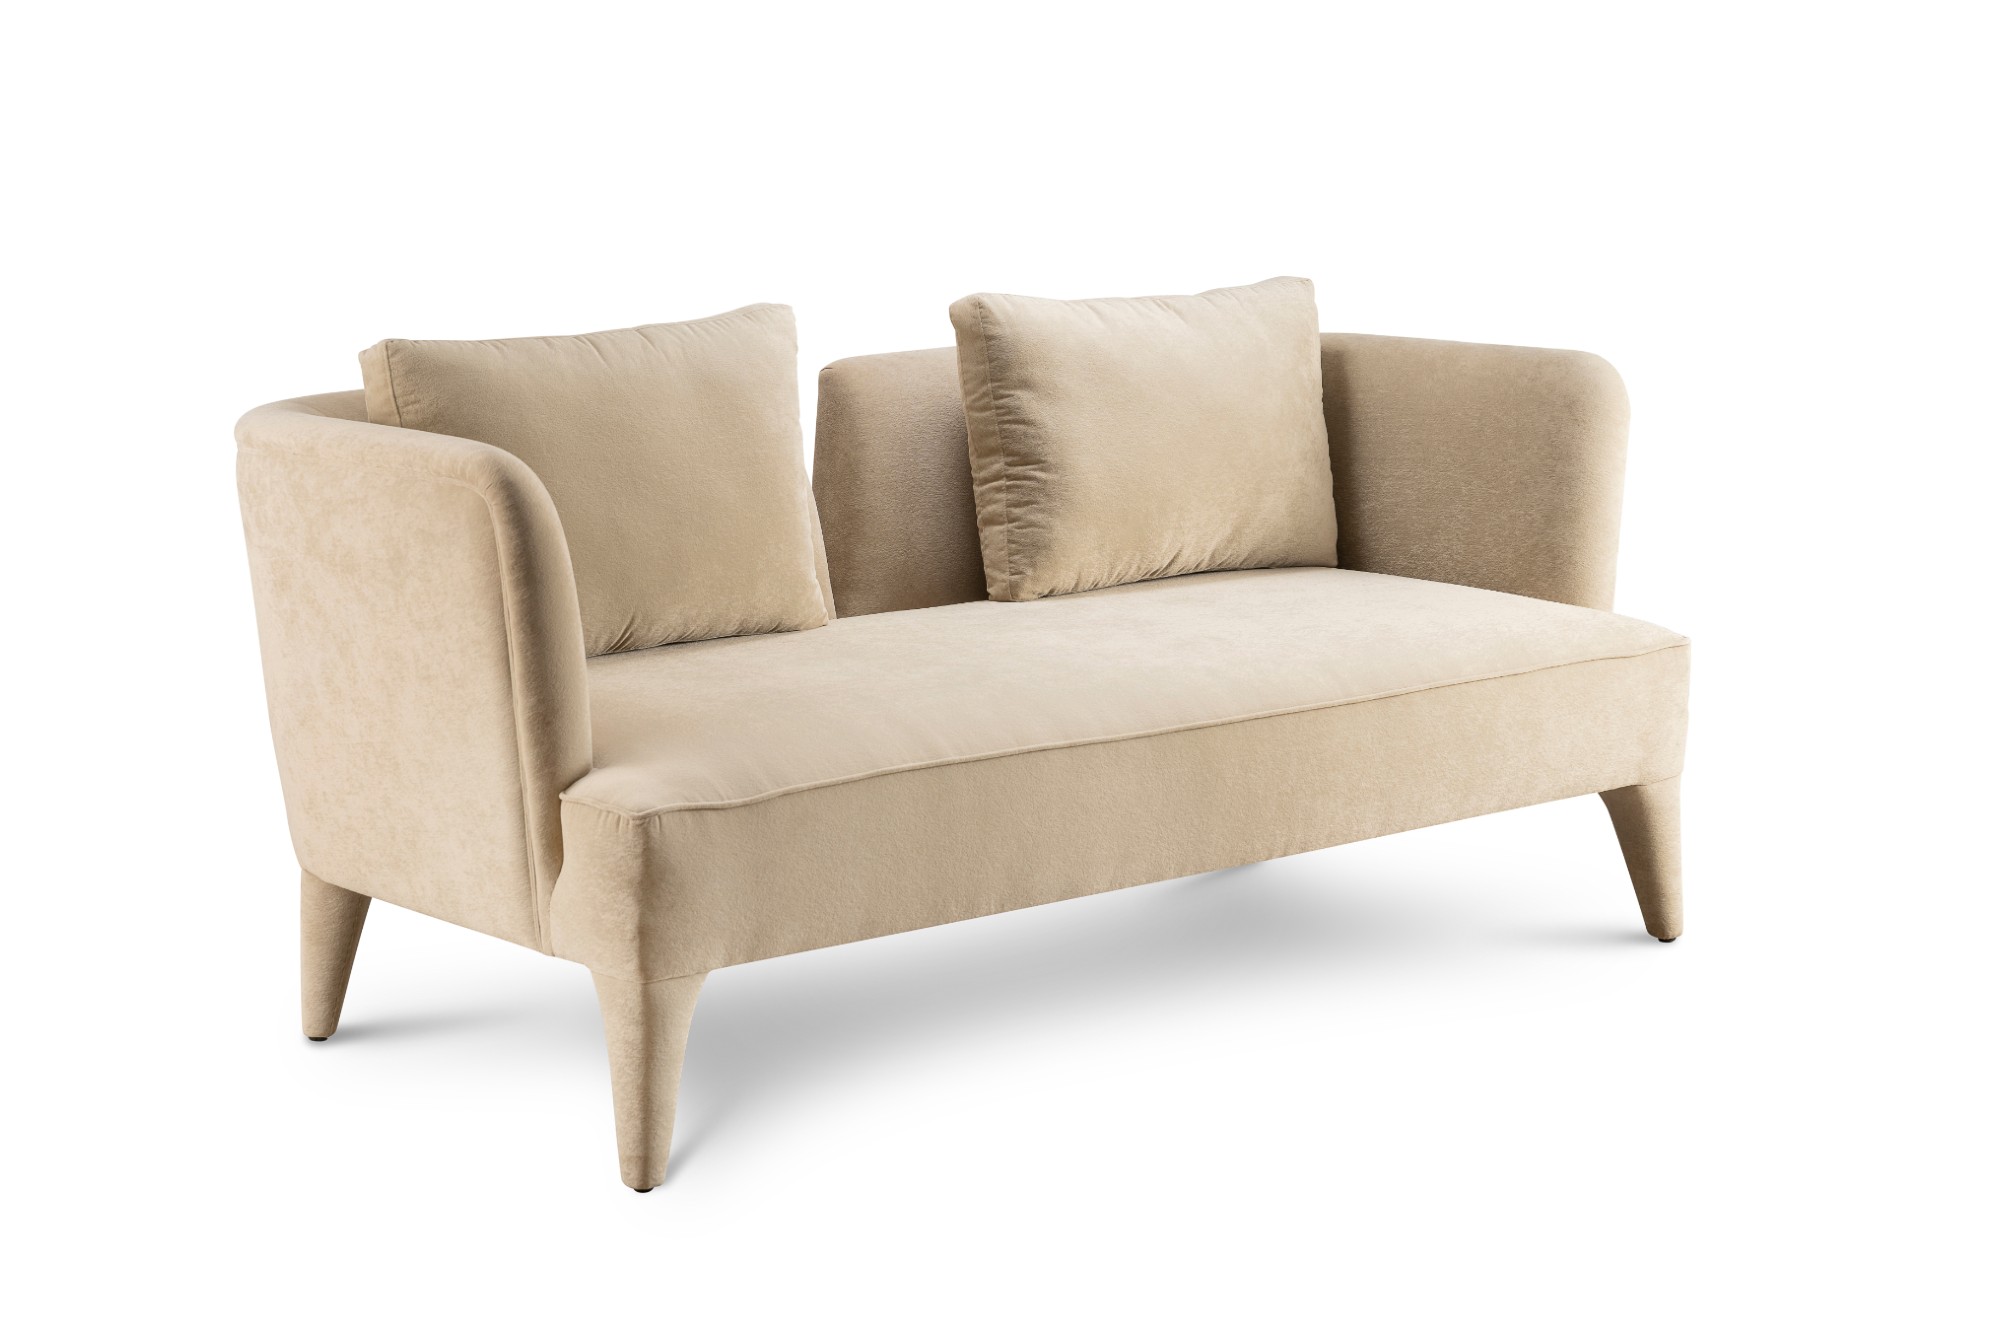 Luxurious sofa collection by Ochre at Home